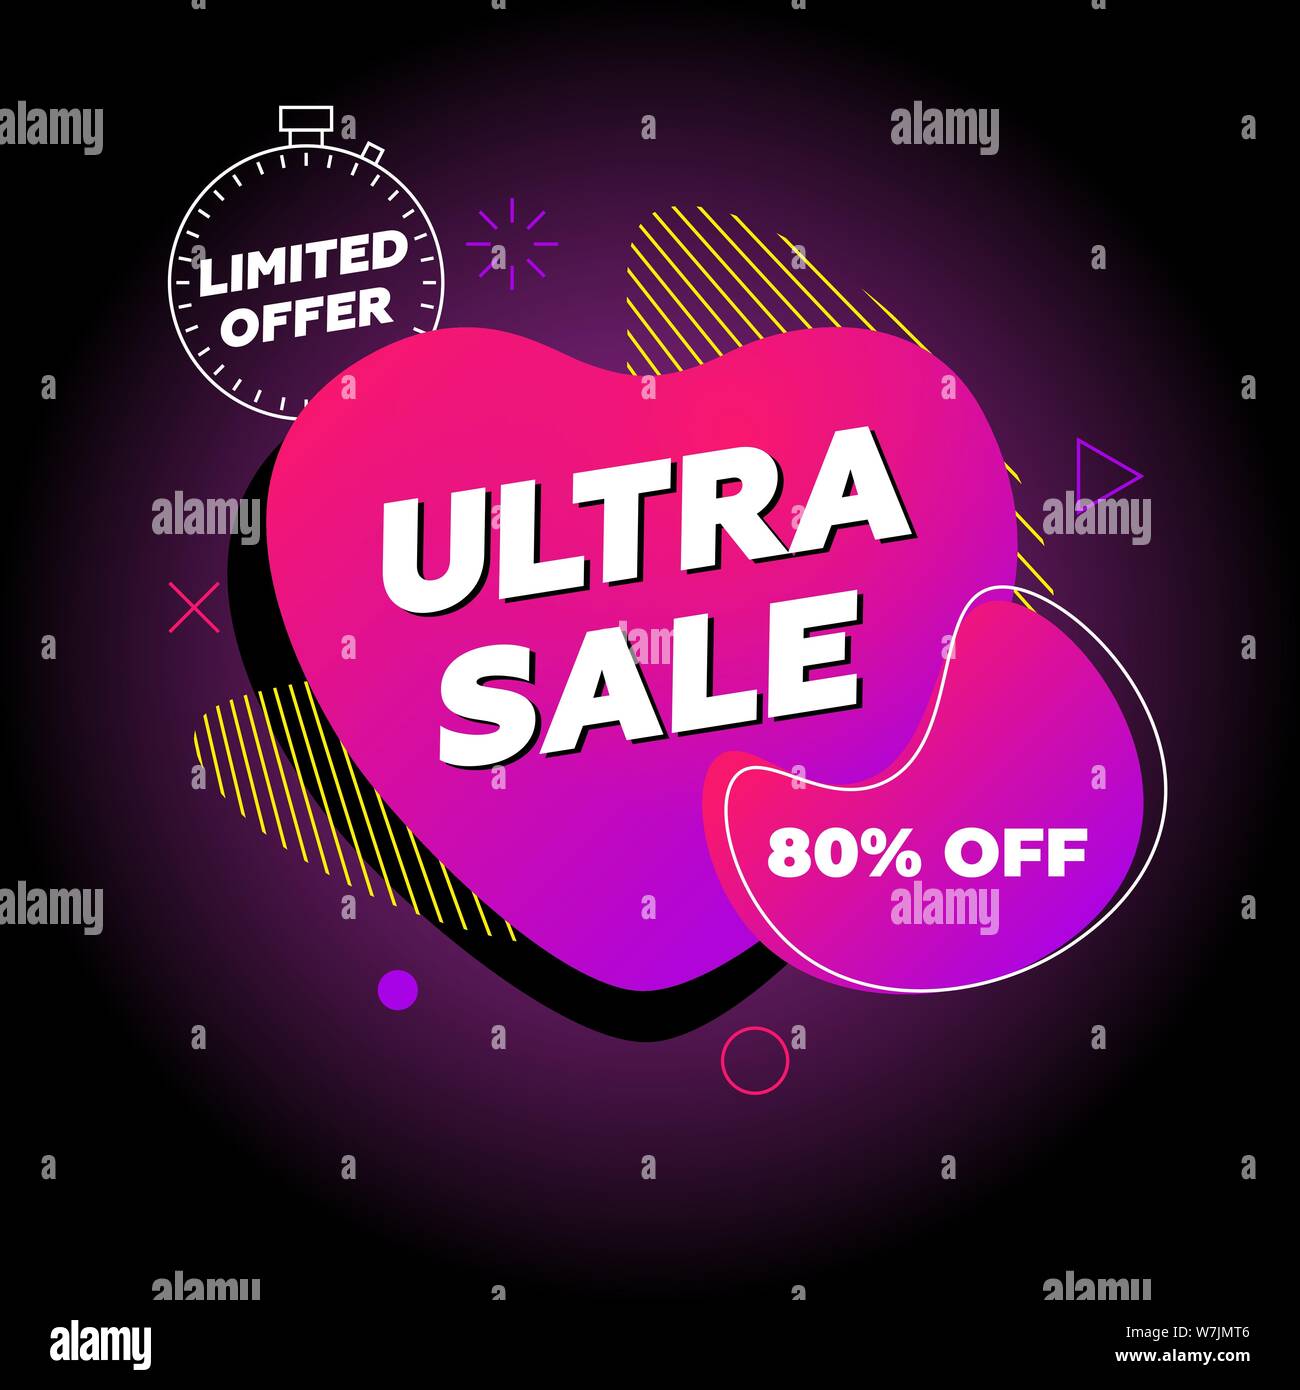 Ultra sale banner. Limited offer template design on purple abstract liquid shape. Flat geometric gradient colored graphic element in heart fluid form on black background. Modern vector illustration Stock Vector